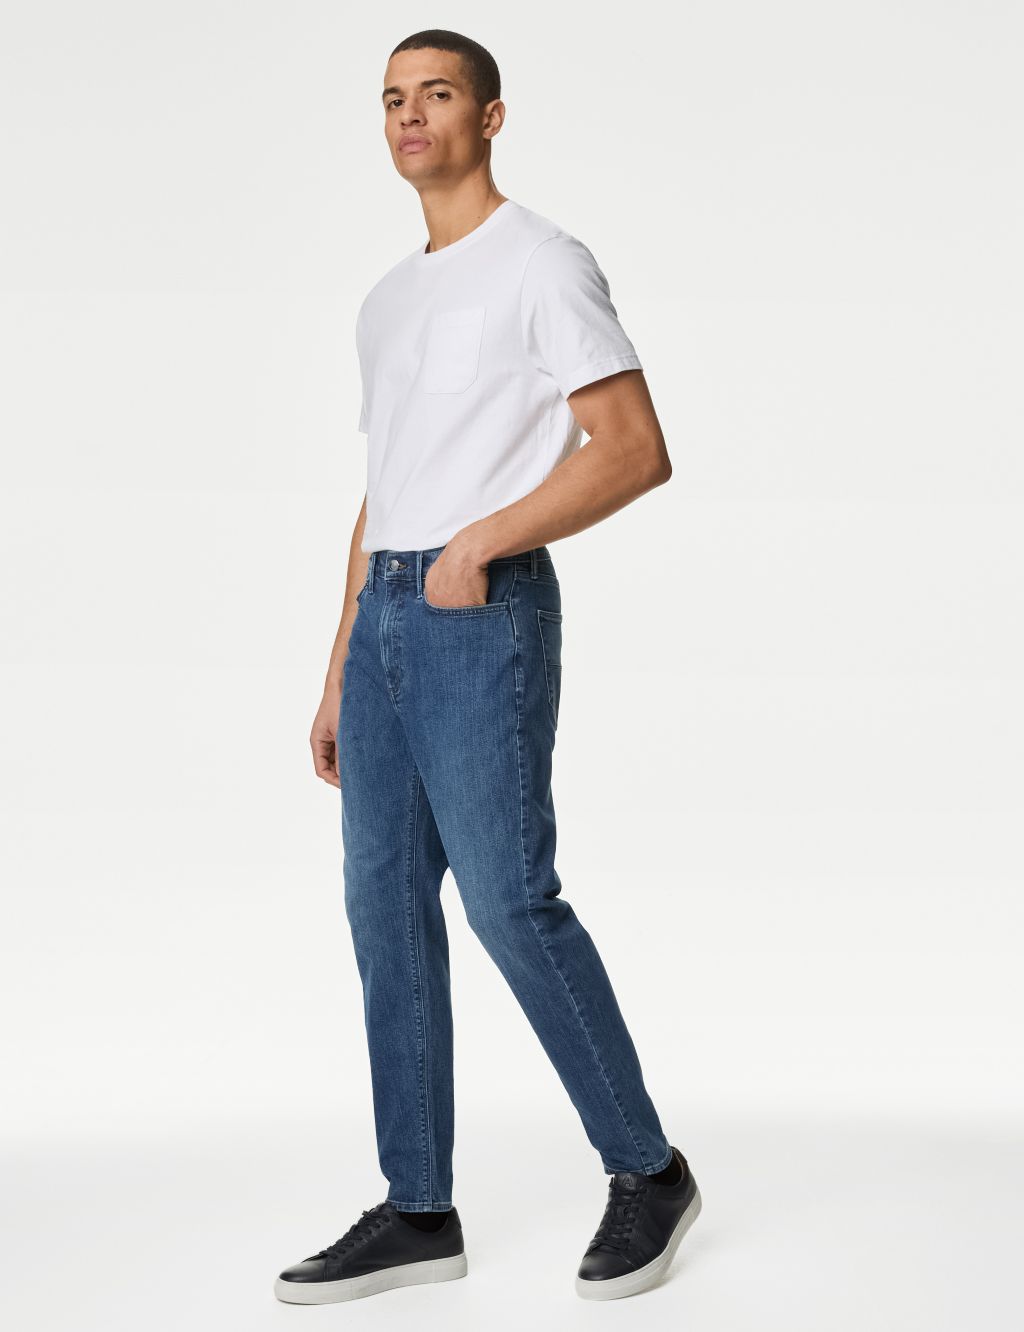 Tapered Fit Stretch Jeans image 5